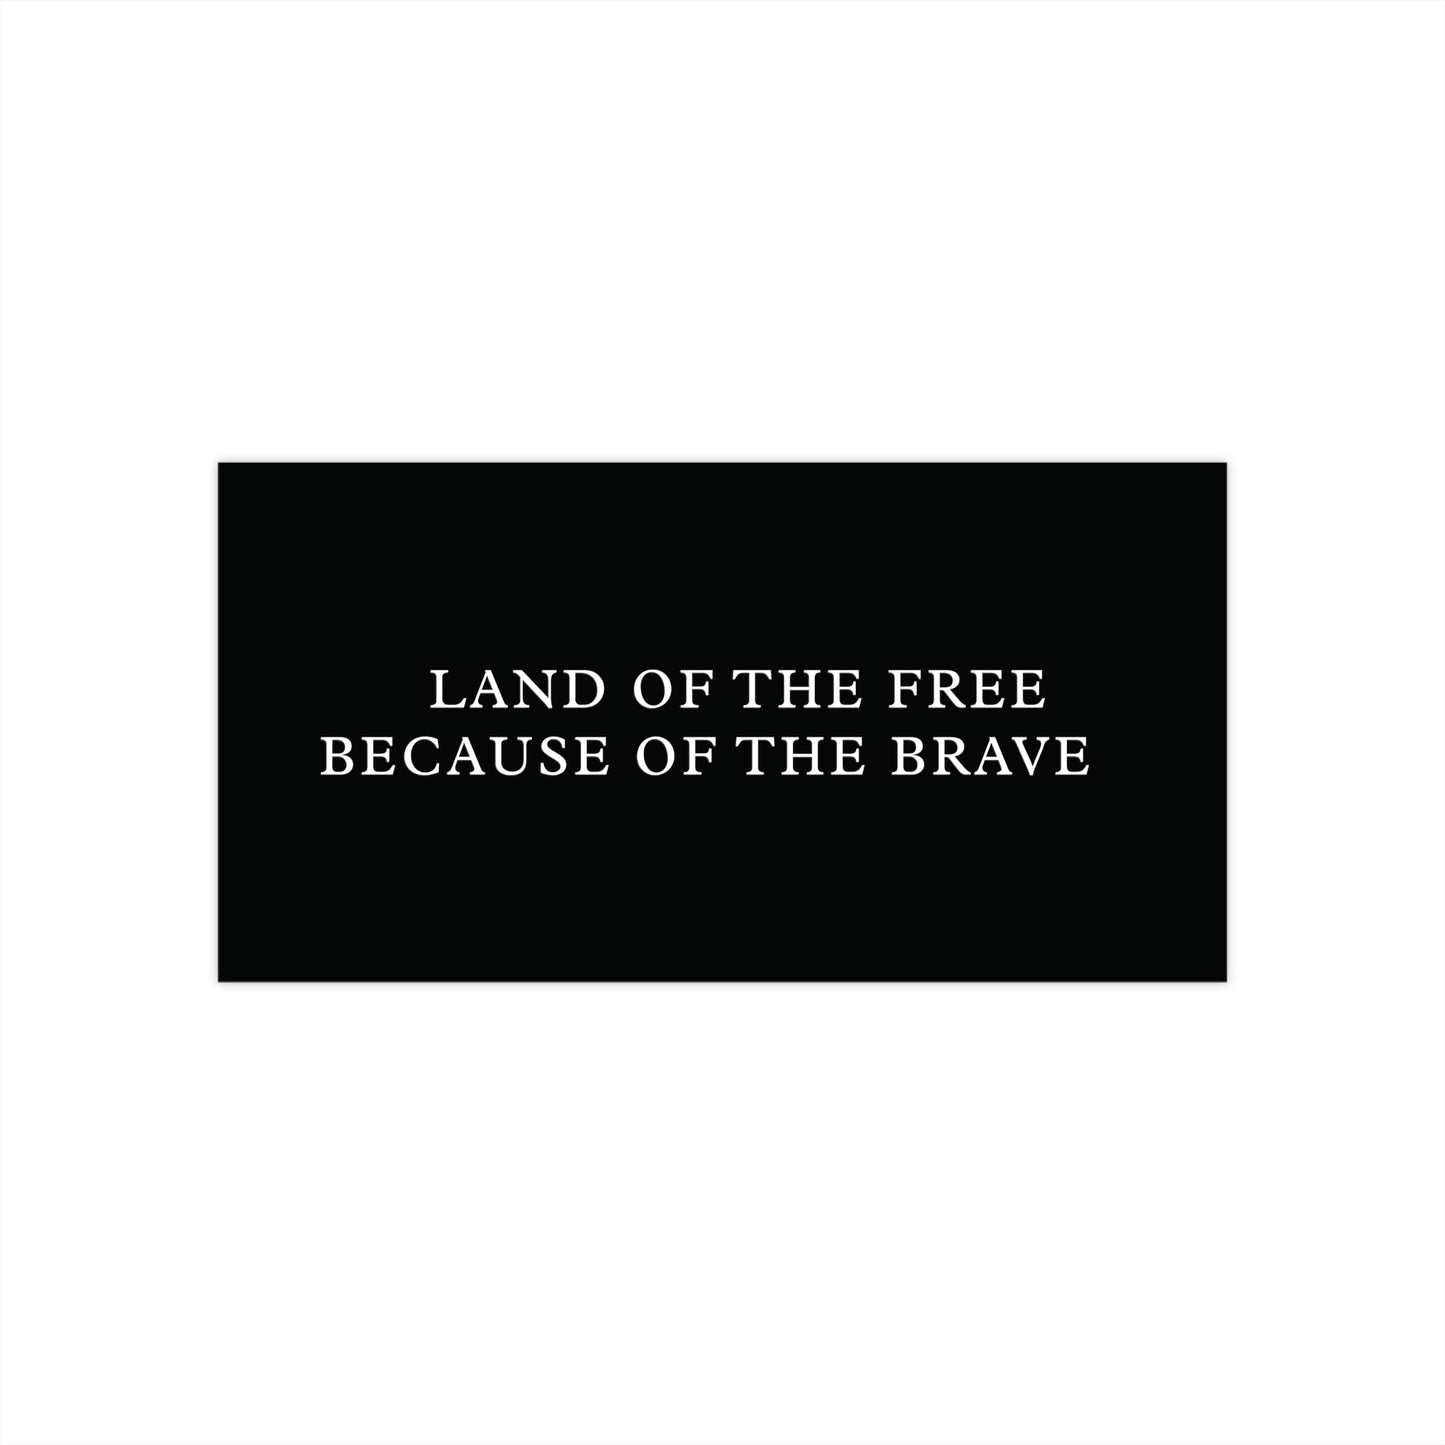 Land of the Free because of the Brave Bumper Stickers